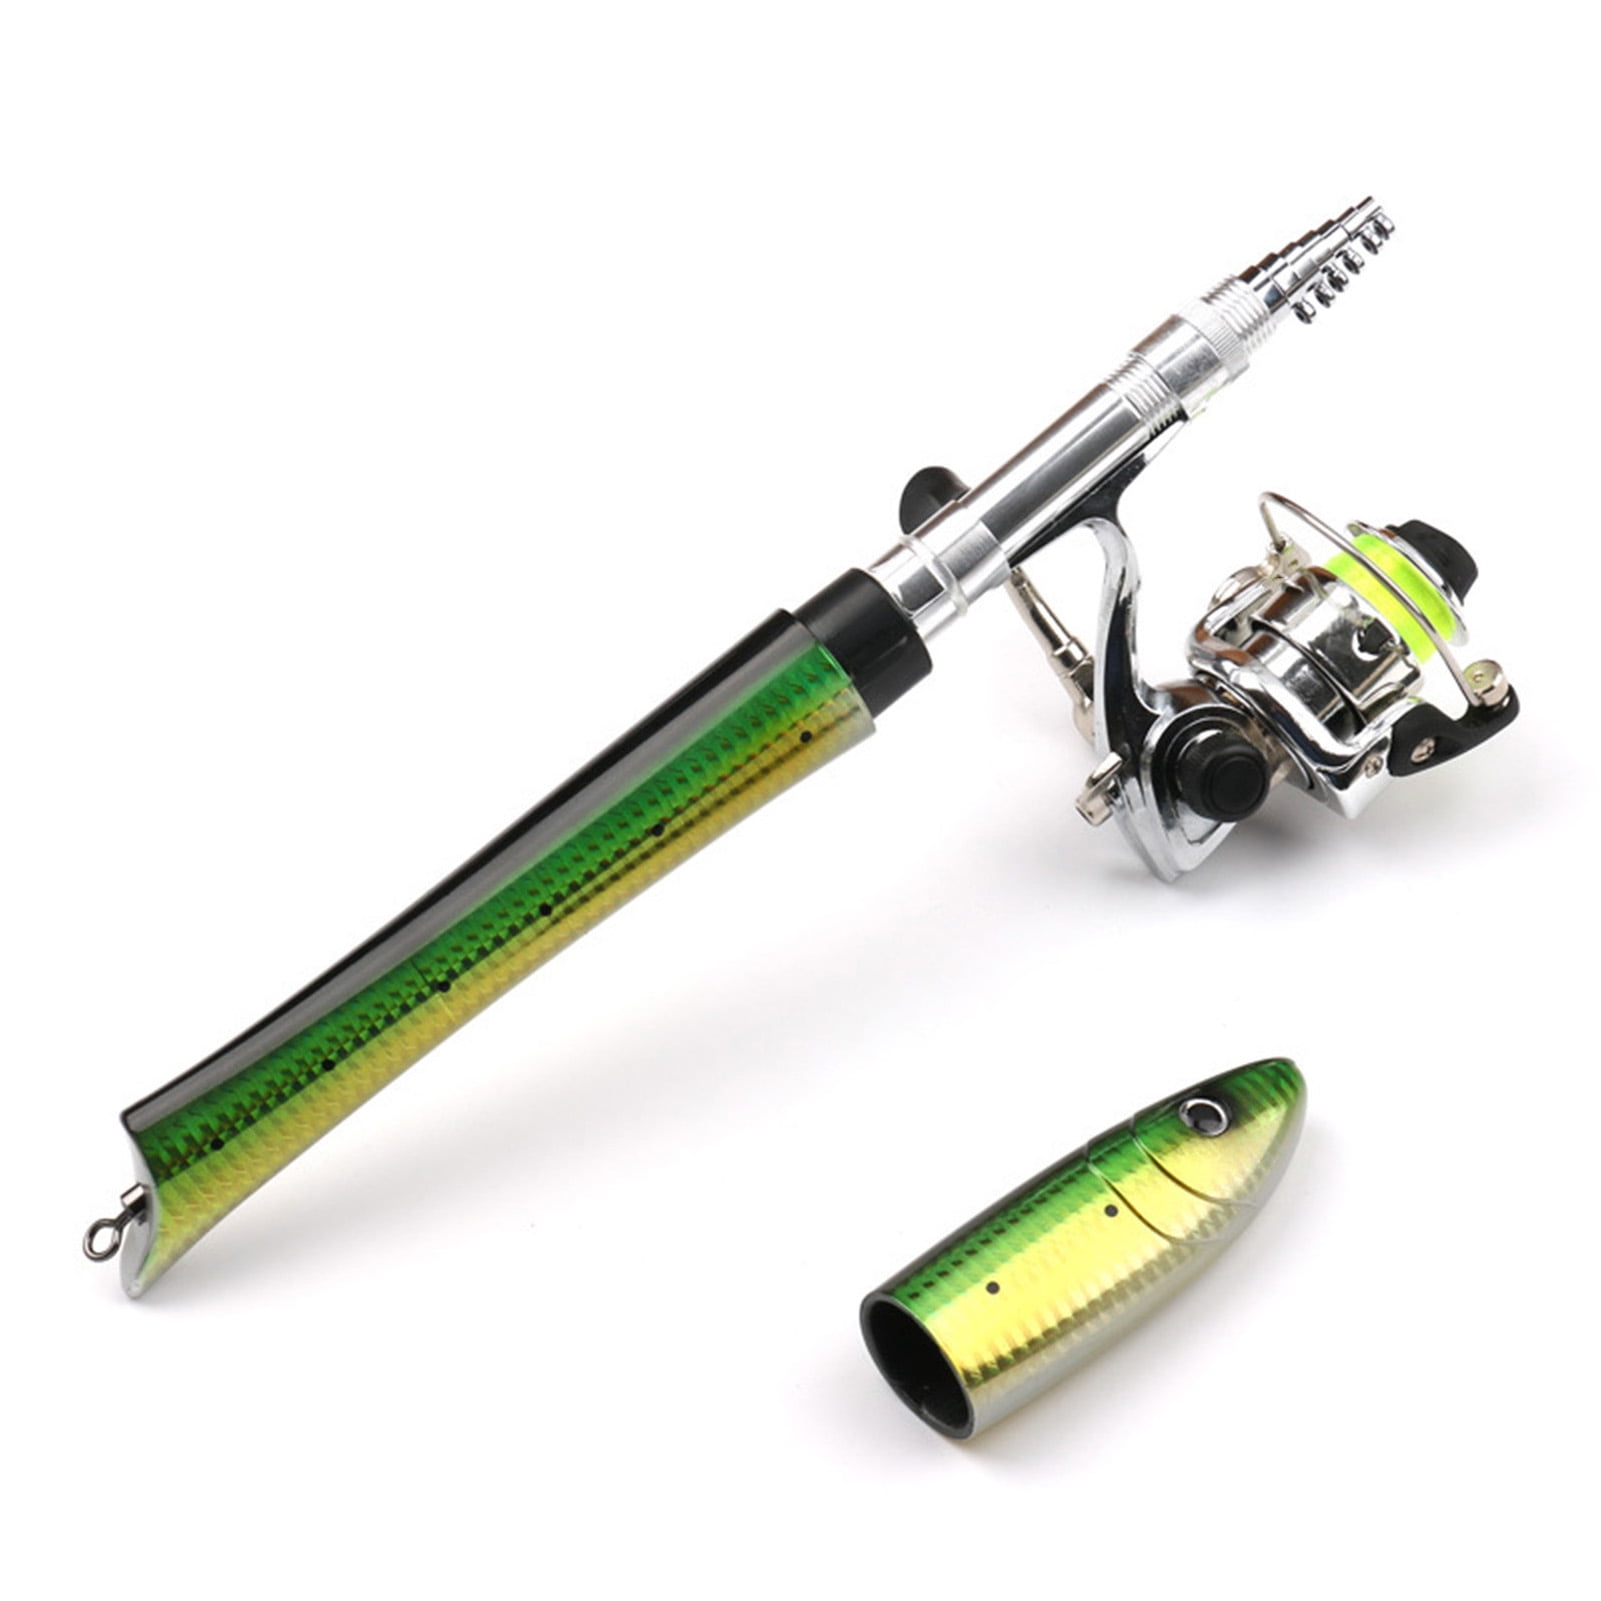 MultiOutools Pen Fishing Pole 38 Inch Mini Pocket Fishing Rod and Reel  Combos Travel Fishing Rod Set for Ice Fly Fishing Sea Saltwater Freshwater,  Gift for Fest…